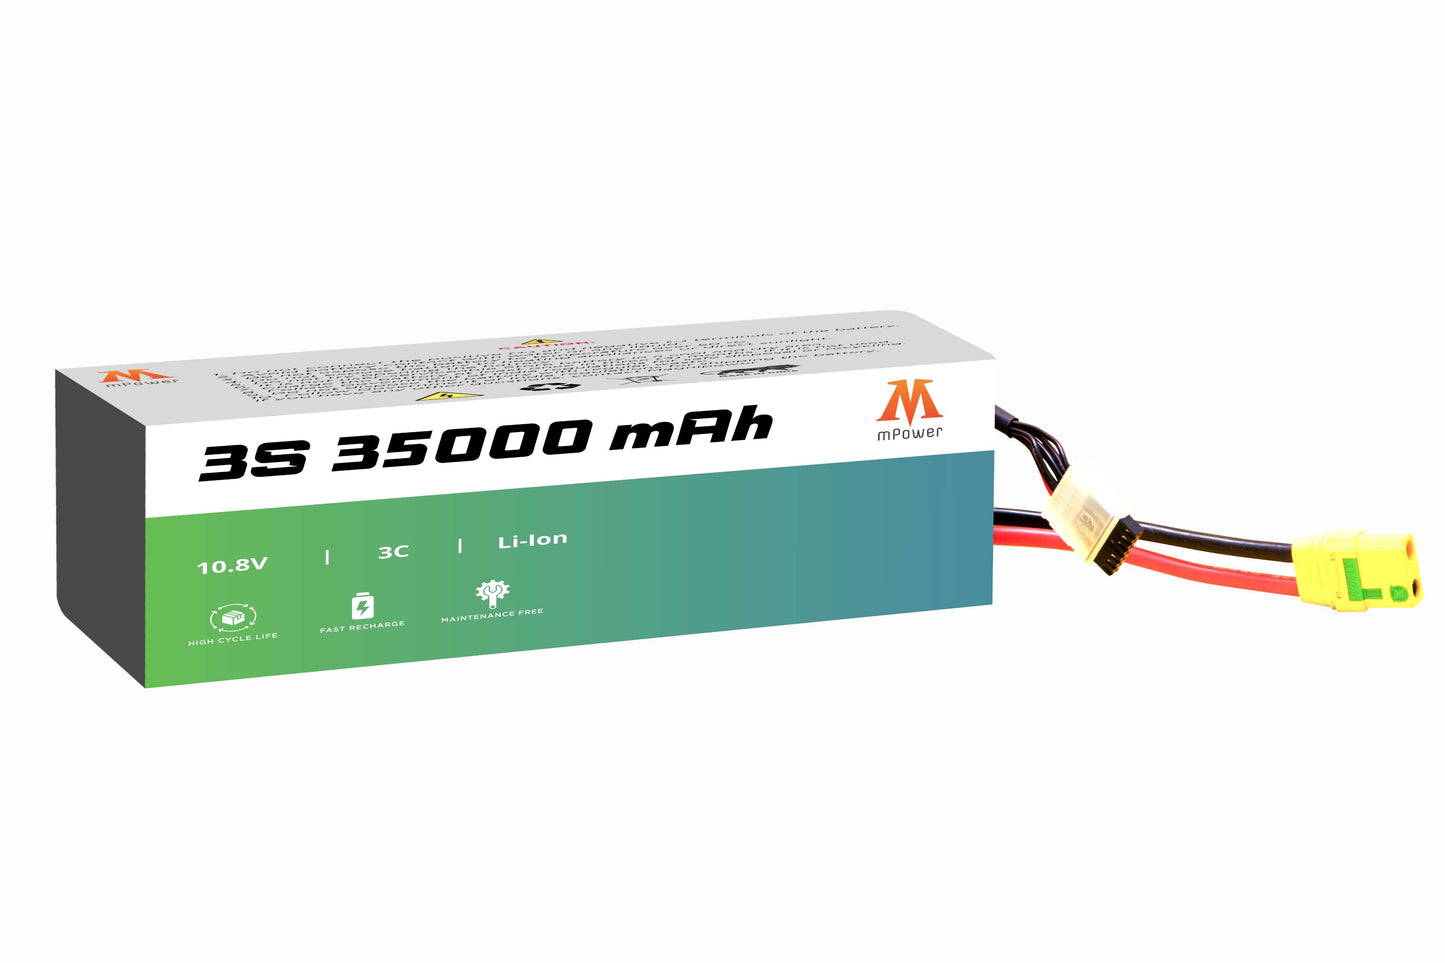 mPower 3S 35000mAh Lithium-Ion Battery for Survey Drones